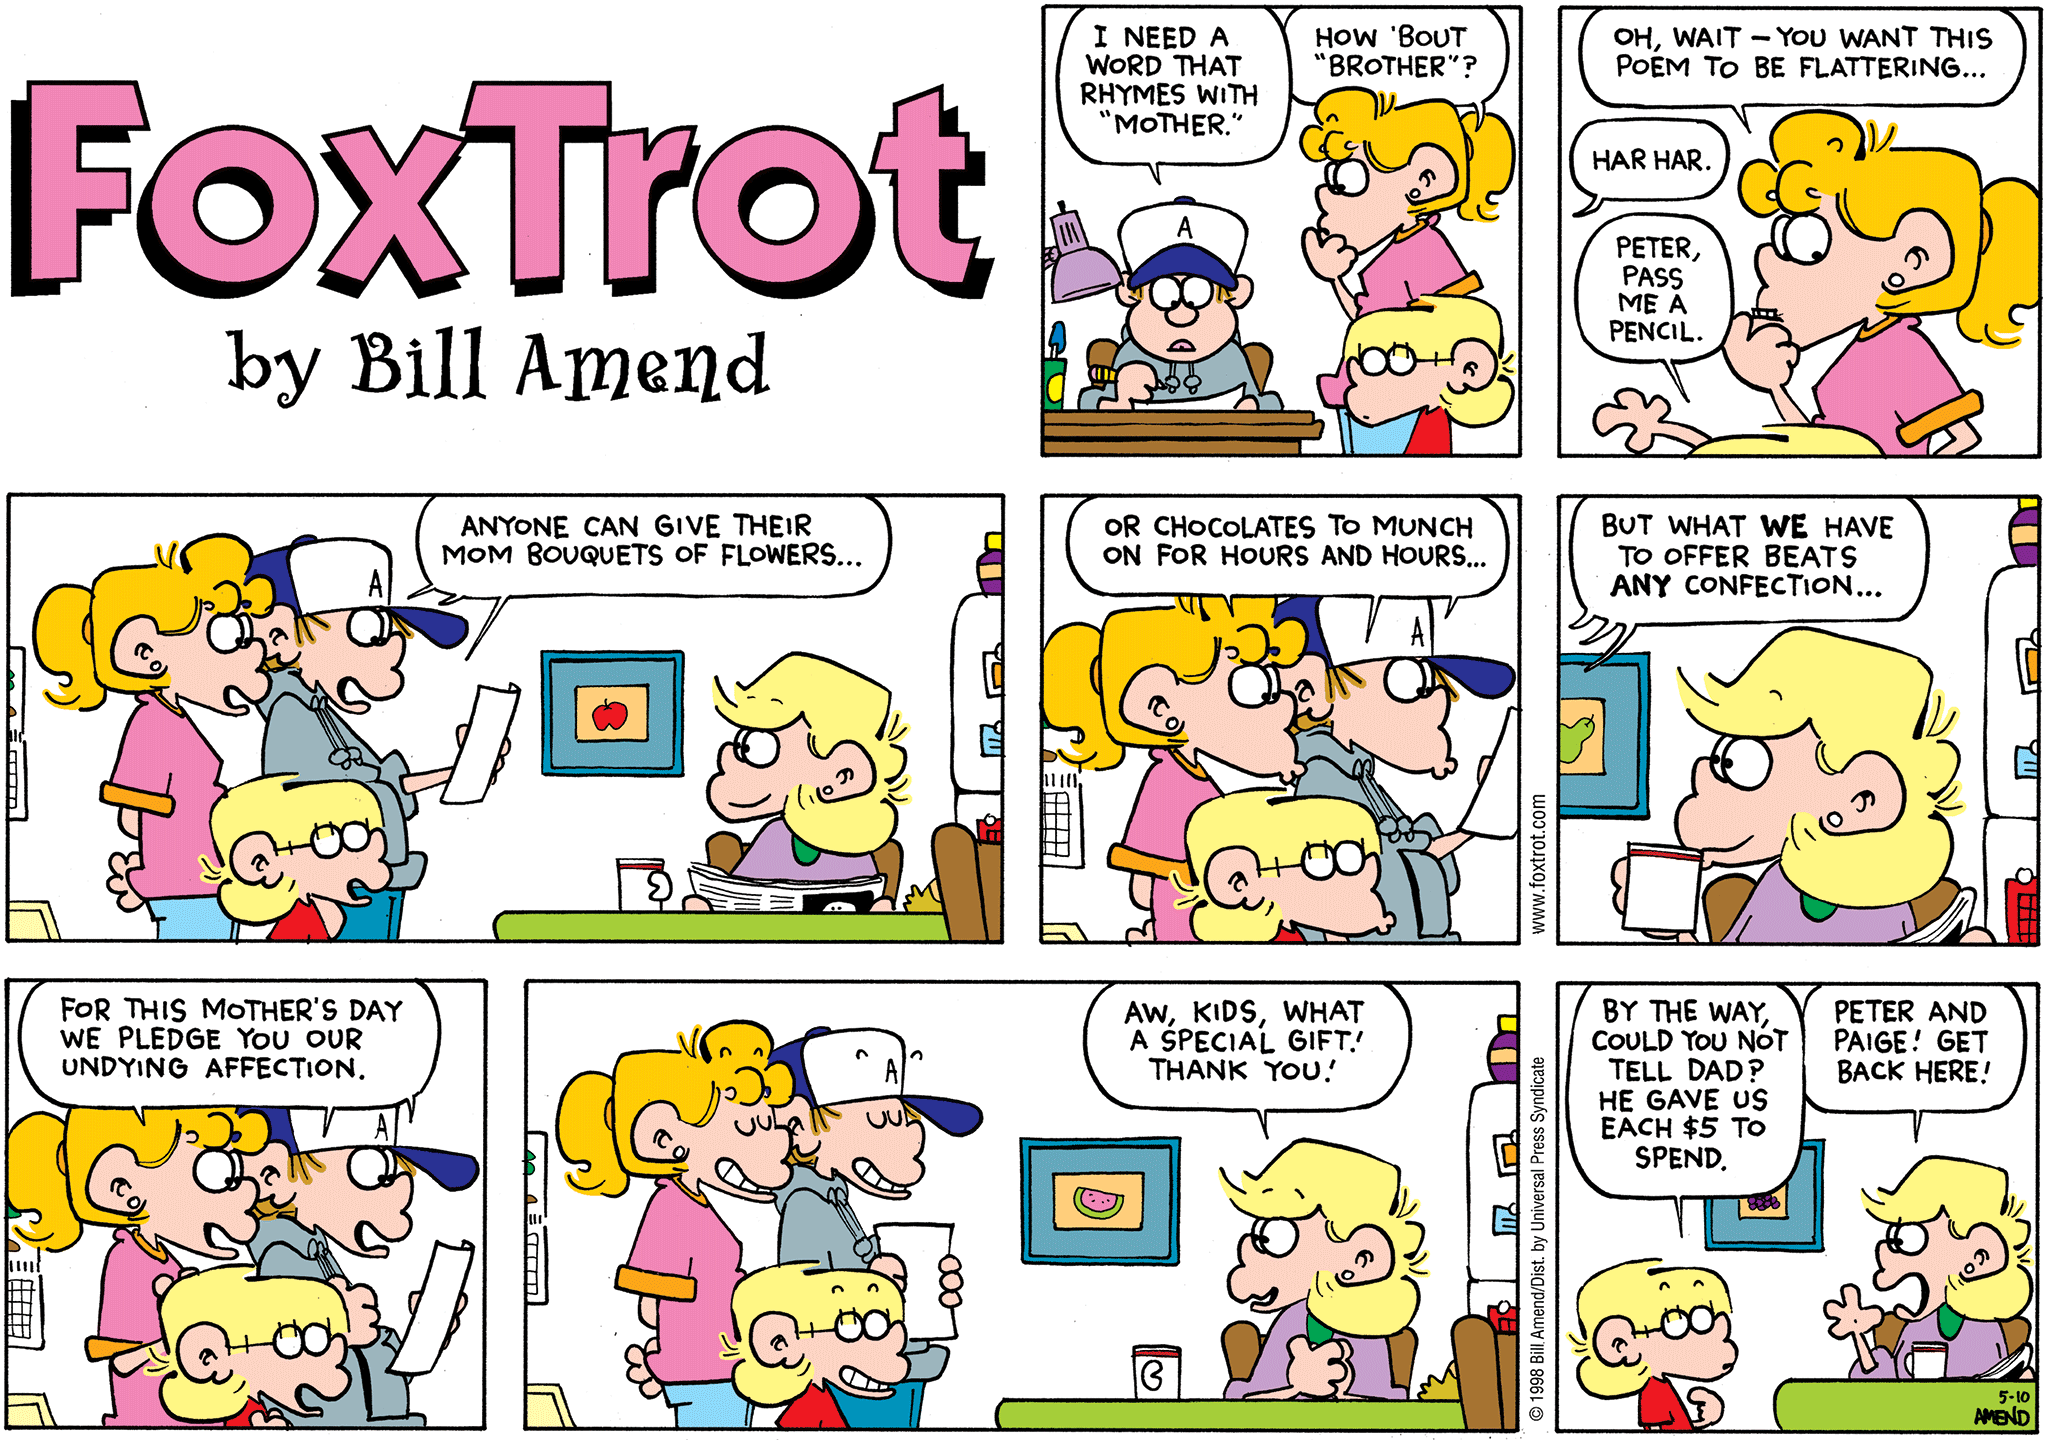 FoxTrot comic strip by Bill Amend - Mother's Day comic published May 10, 1998 - Peter Fox: I need a word that rhymes with "Mother." Paige Fox: How 'bout "brother." Paige Fox: Oh, wait - you want this poem to be flattering.. Peter Fox: Har har. Jason Fox: Peter, pass me a pencil. Peter Fox: Anyone can give their Mom bouquets of flowers..or chocolates to munch on for hours and hours..but what we have to offer beats any confection..for this Mother's Day we pledge you our undying affection. Andy Fox: Aw, kids, what a special gift! Thank you! Jason Fox: By the way, could you not tell Dad? He gave us each $5 to spend. Andy Fox: Peter and Paige! Get back here!